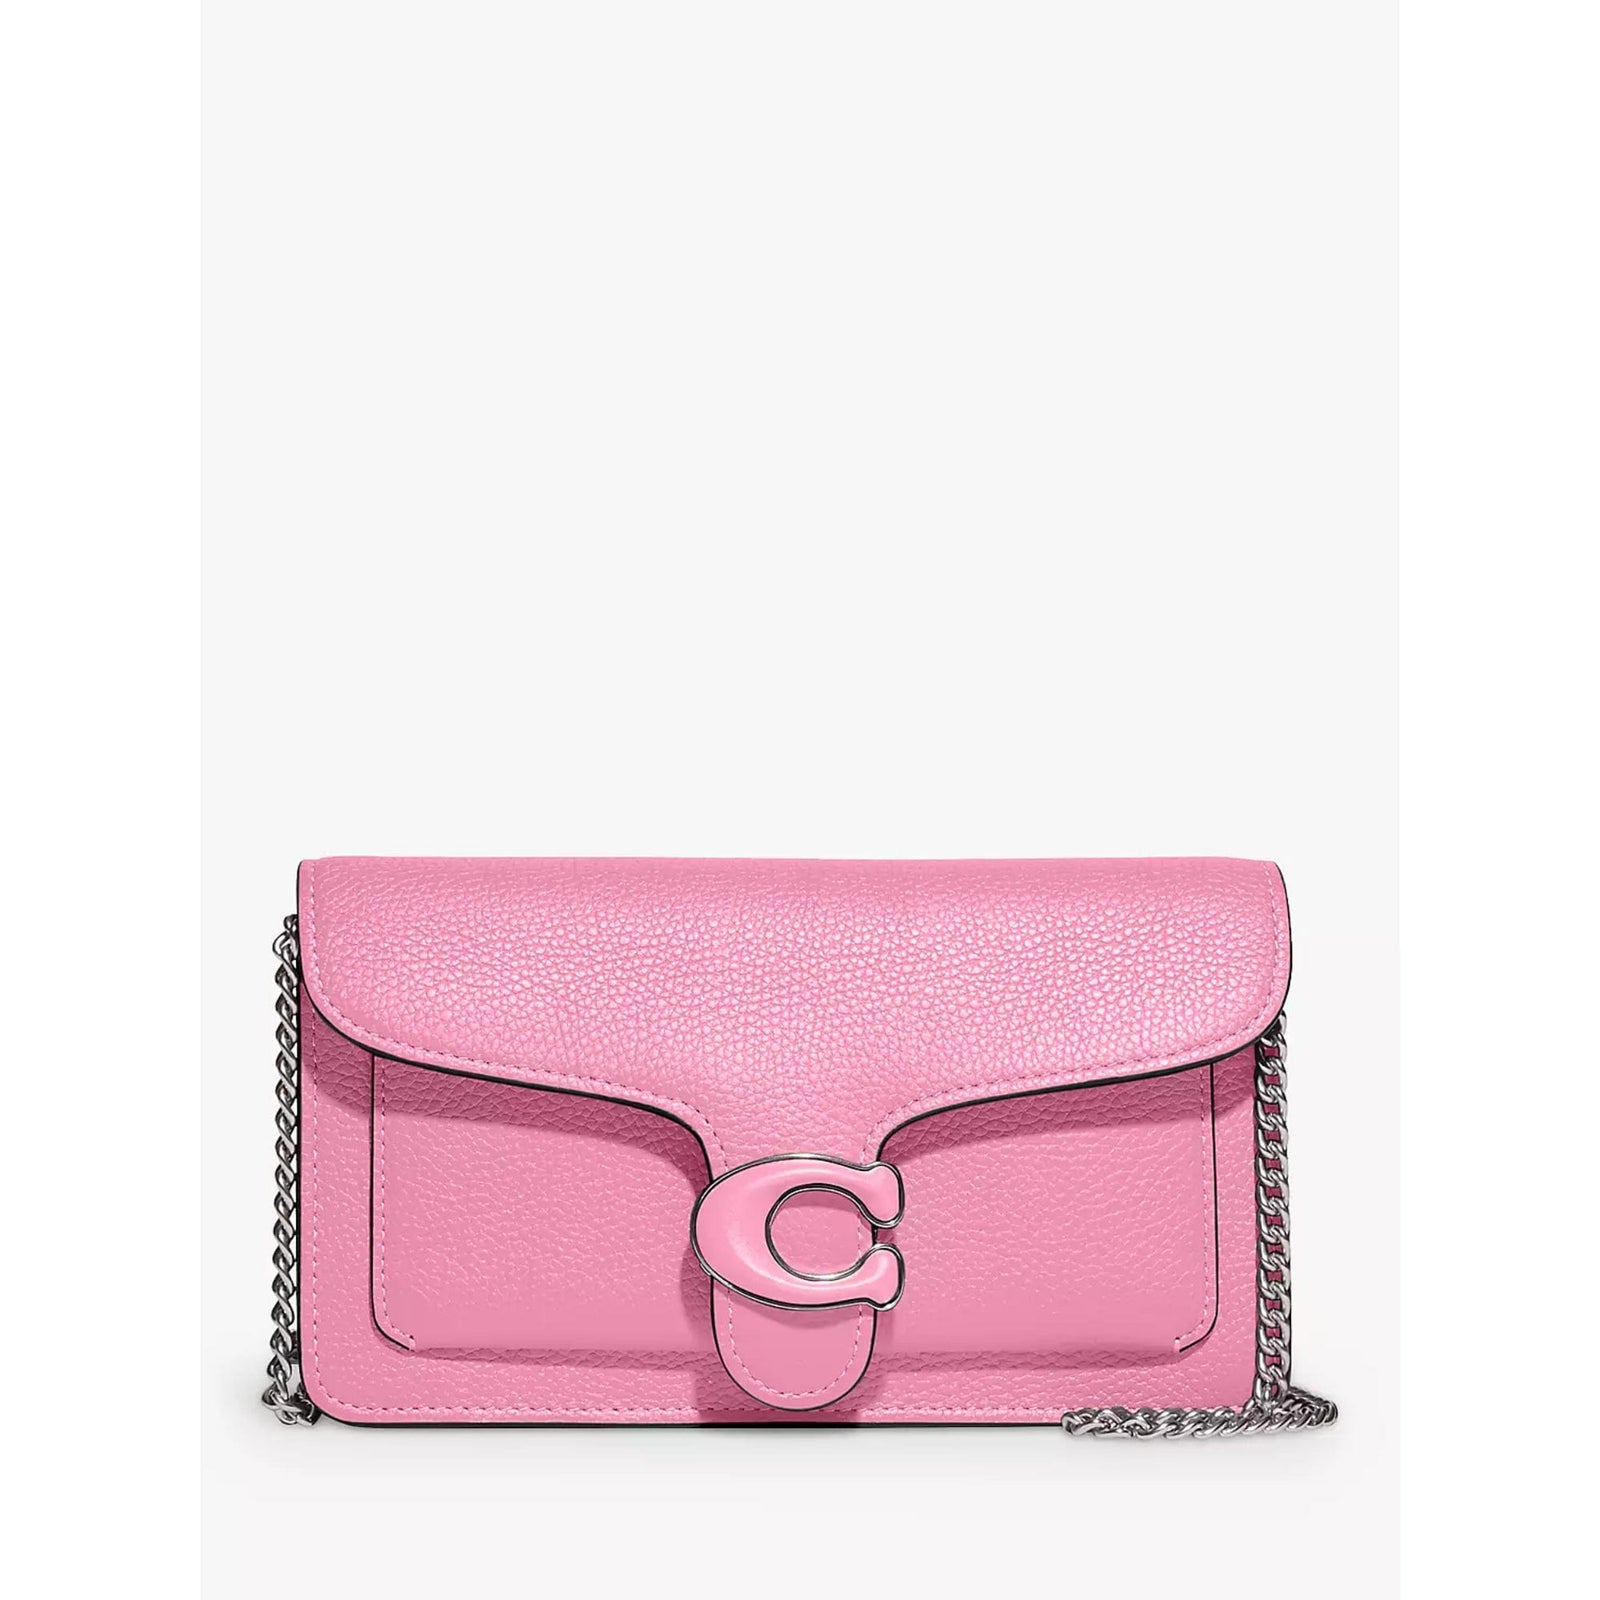 Coach Tabby Chain Leather Clutch Bag in Vivid Pink